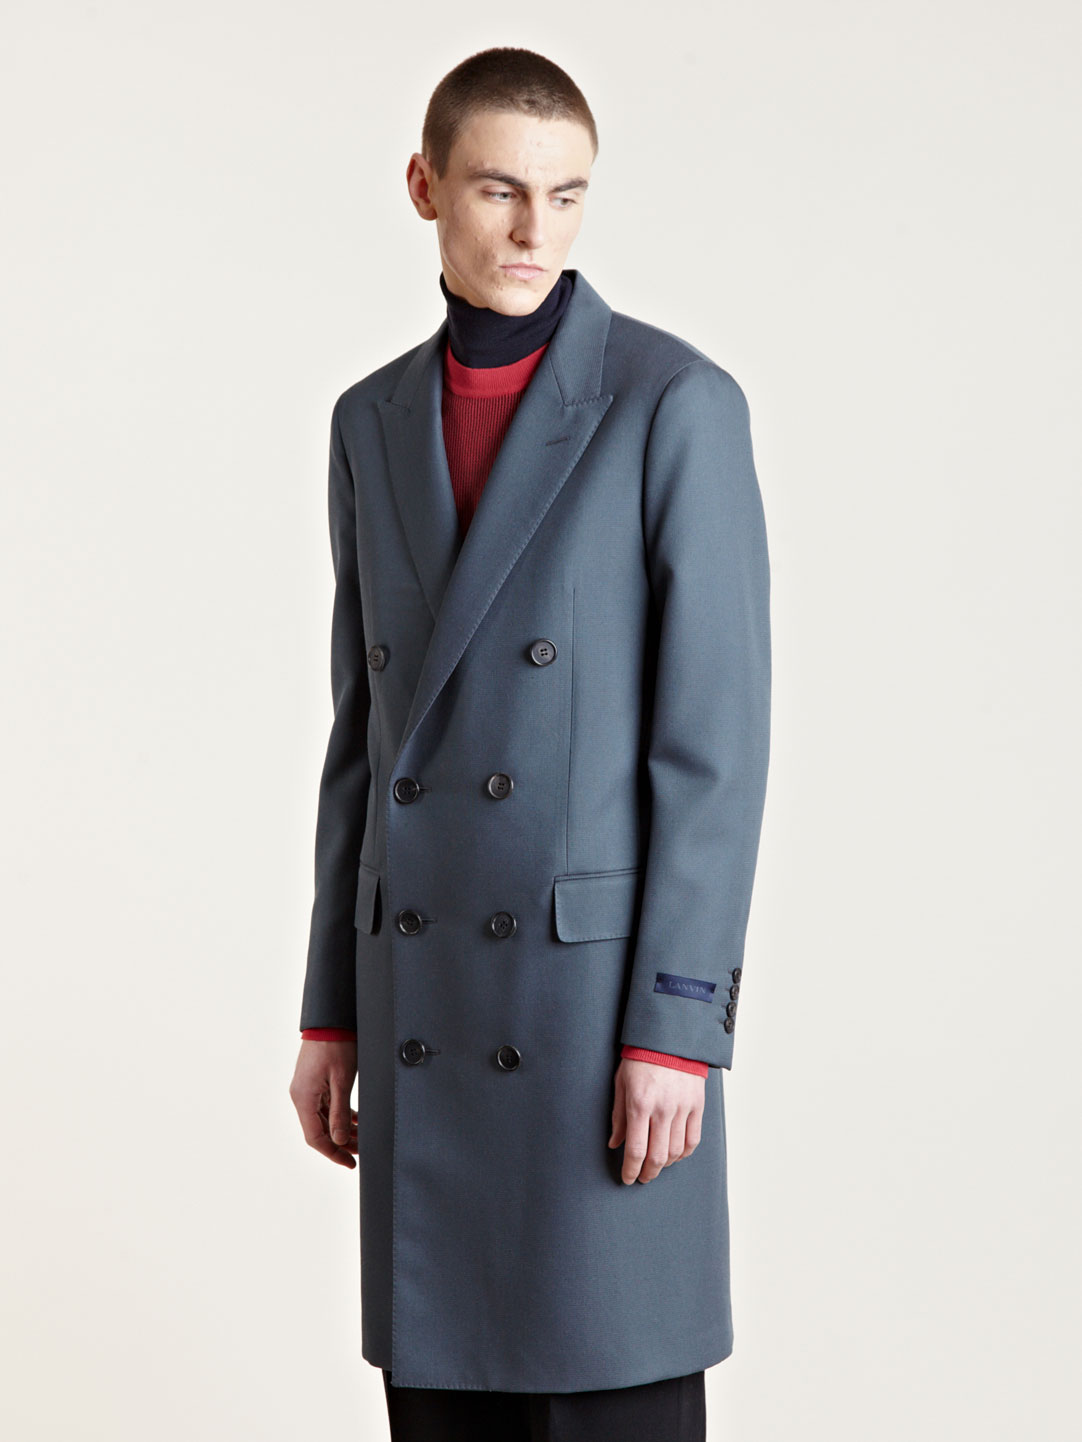 Lyst - Lanvin Mens Double Breasted Coat in Blue for Men